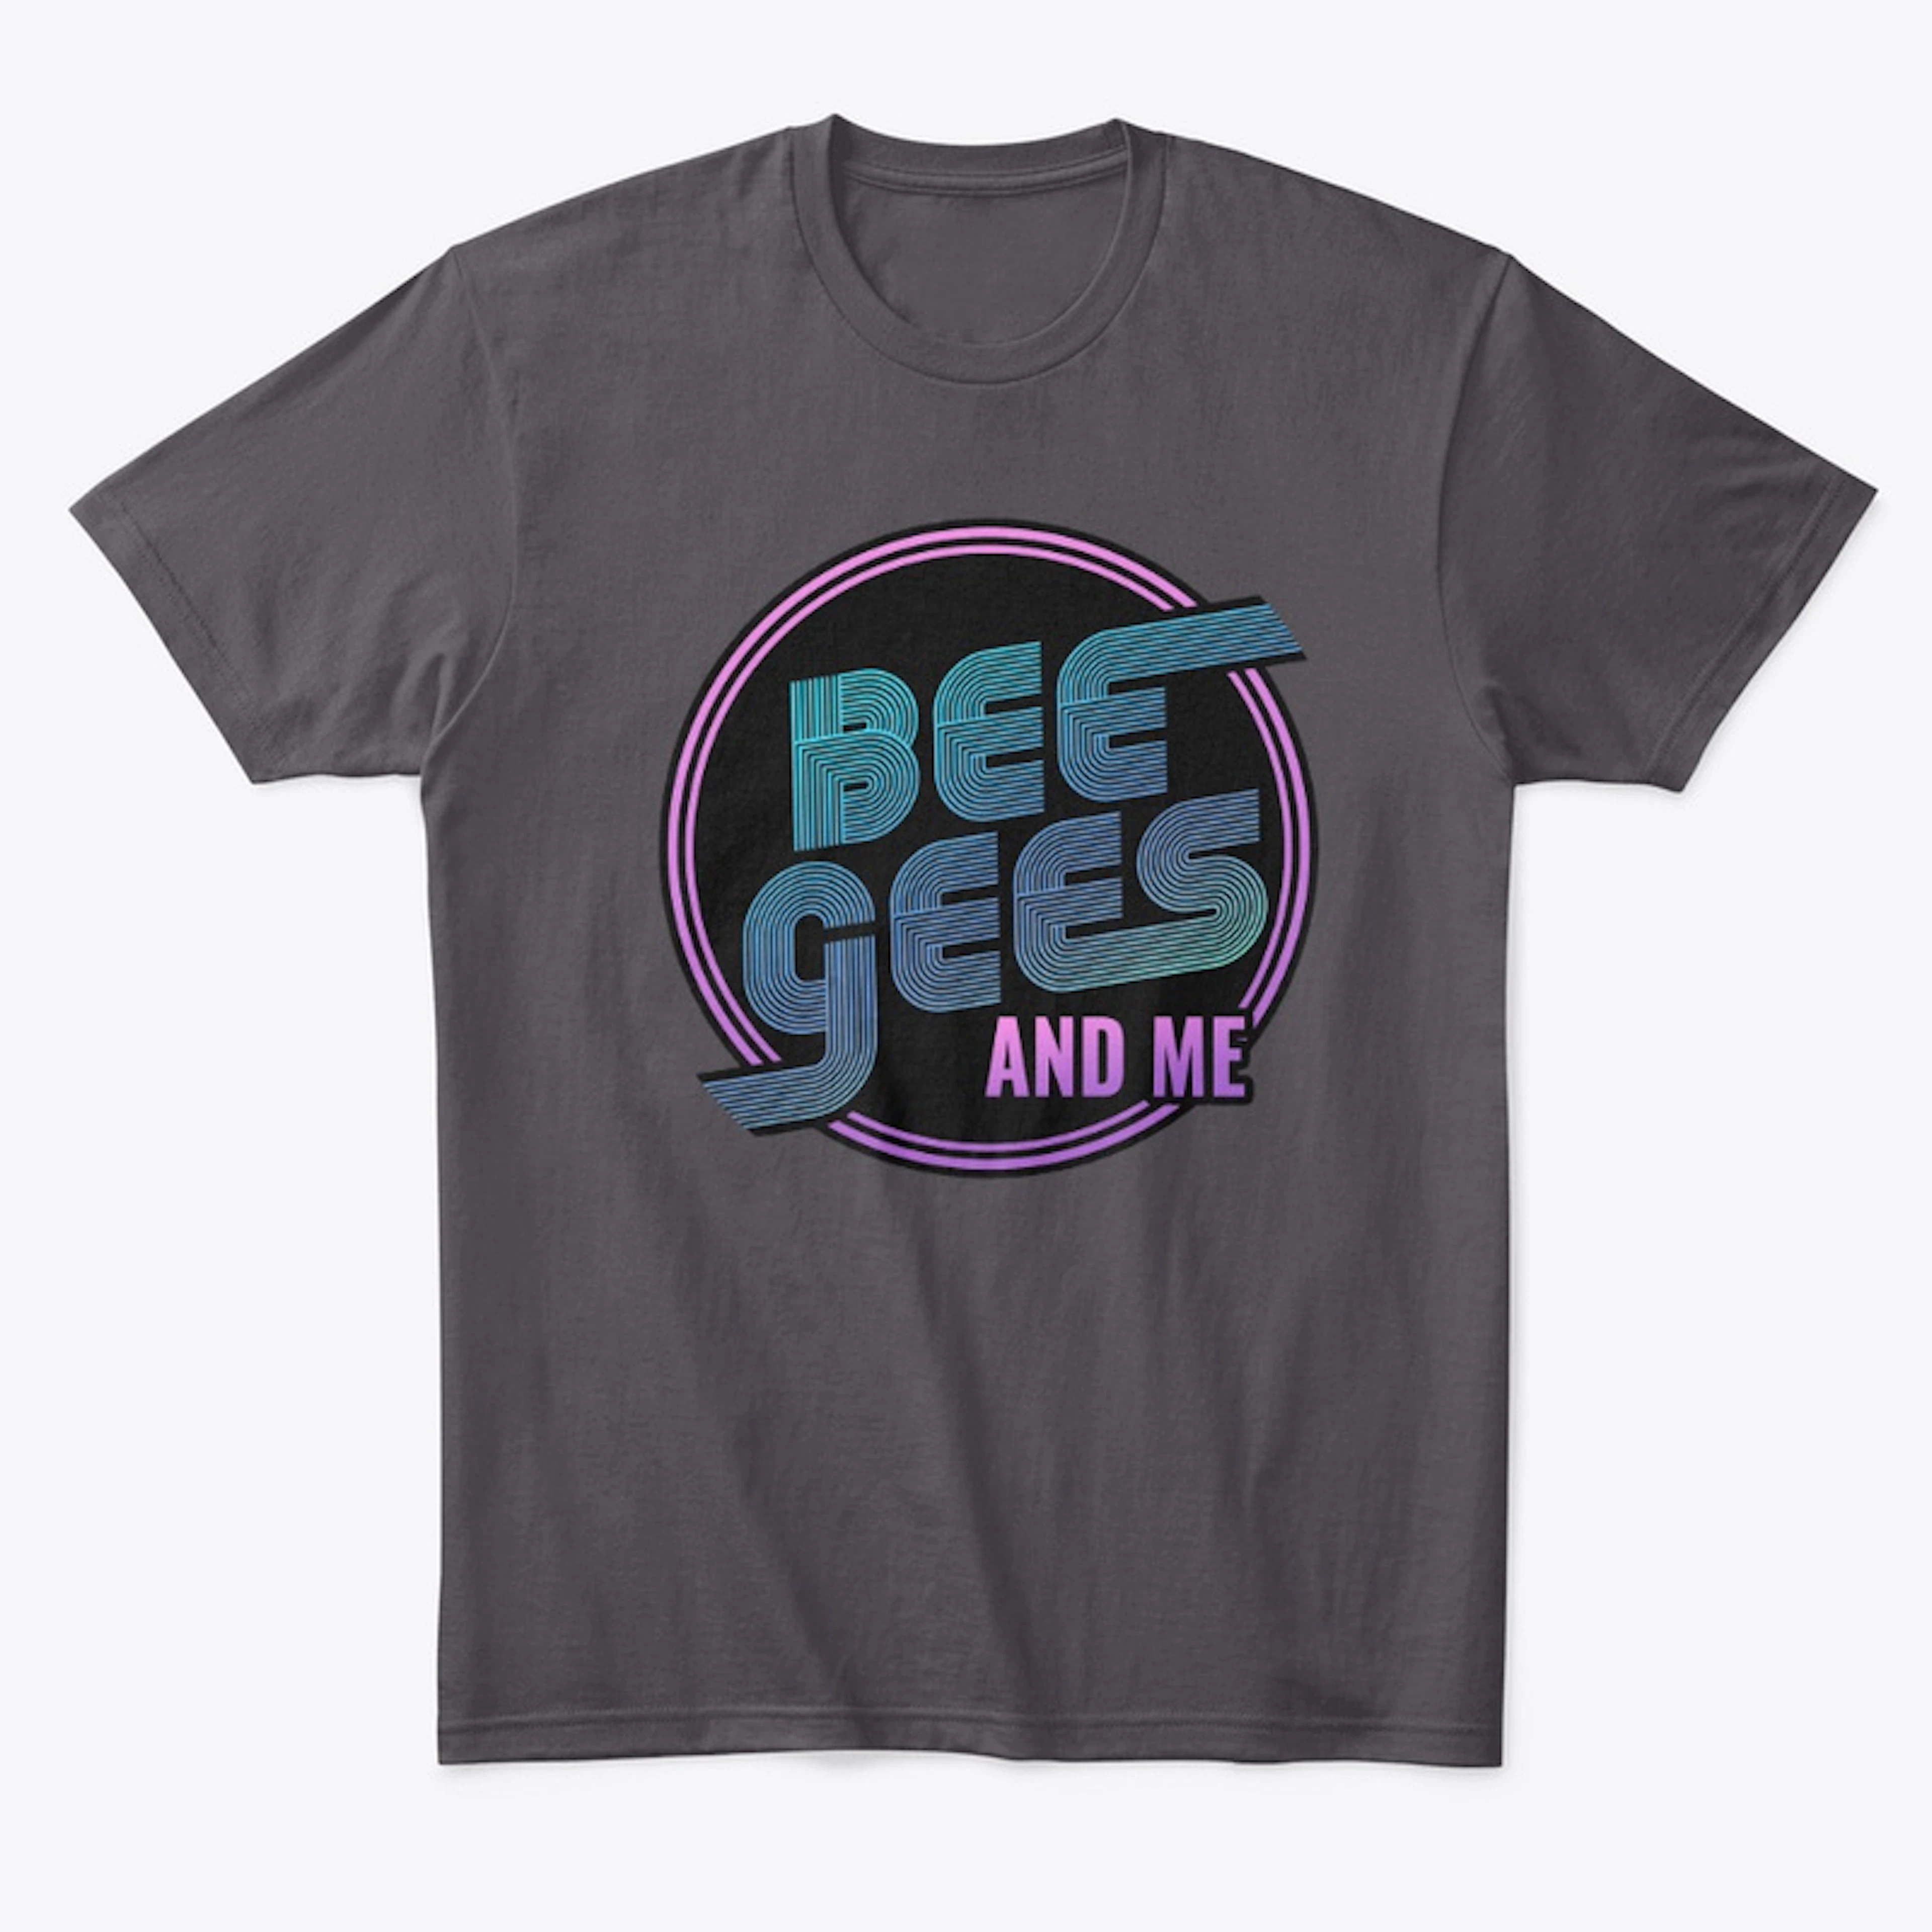 Bee Gees And Me Tee